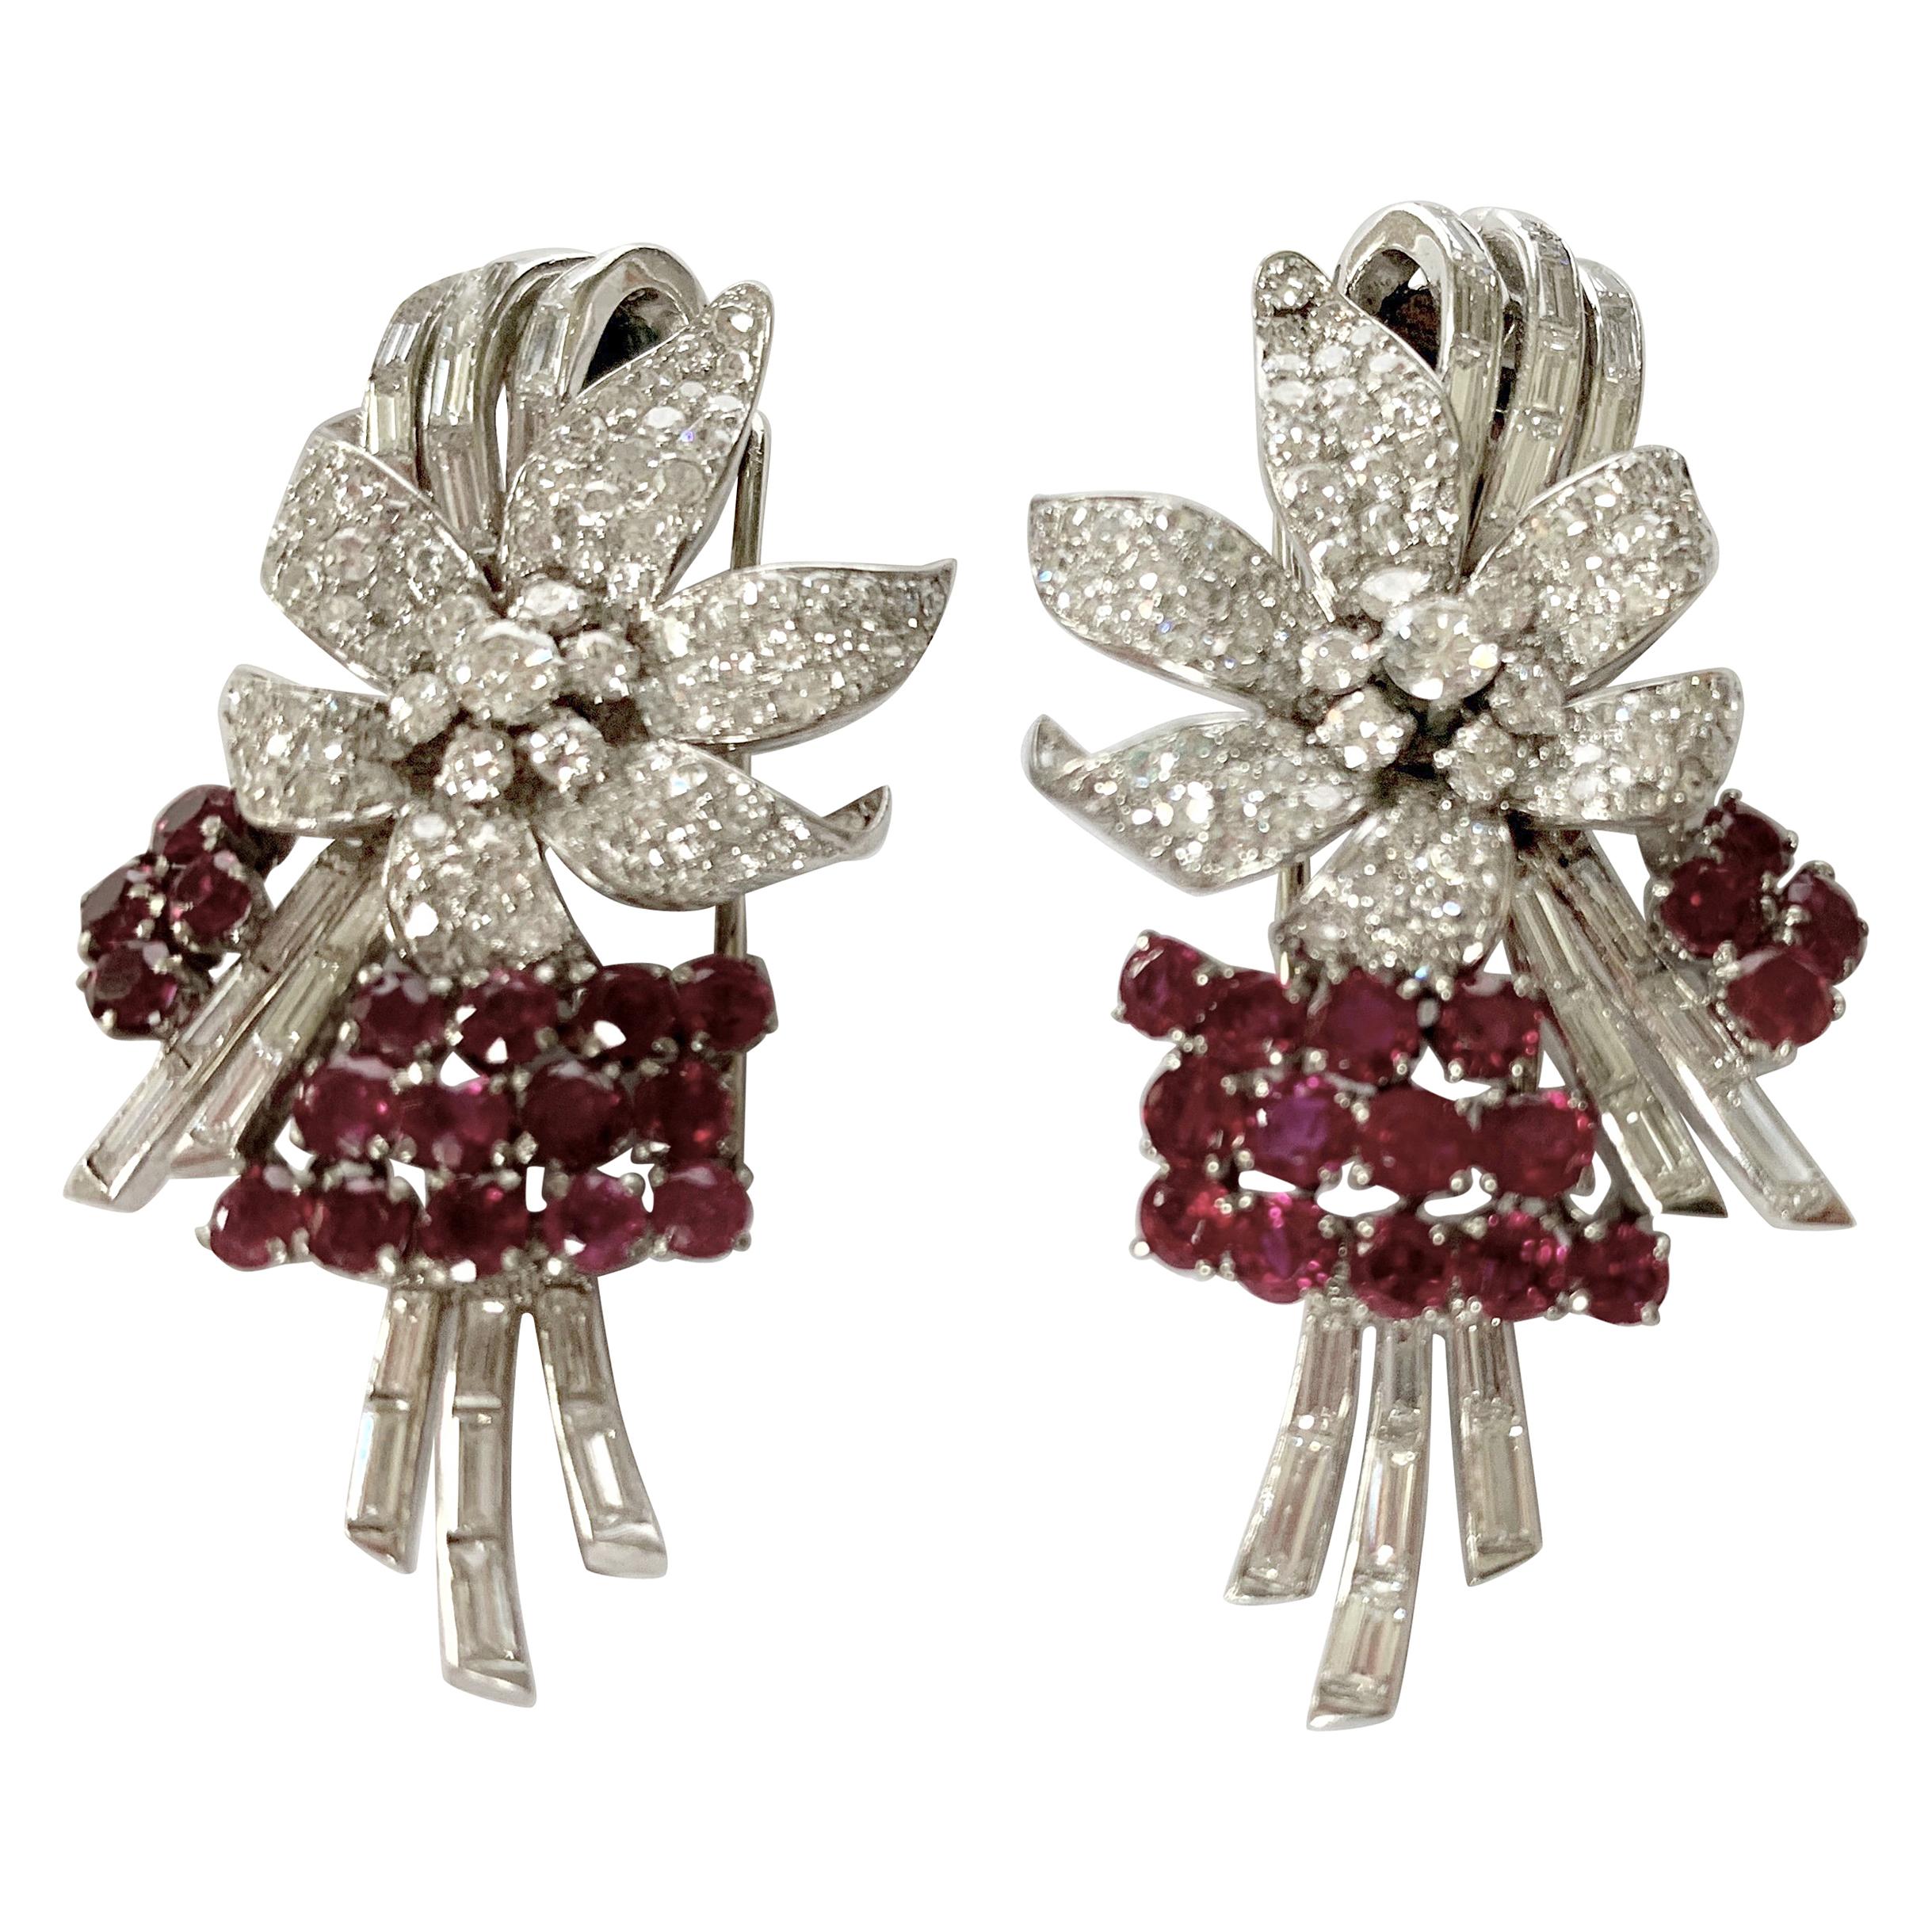 Pair of Platinum Diamond and Ruby Clip Brooches, circa 1950